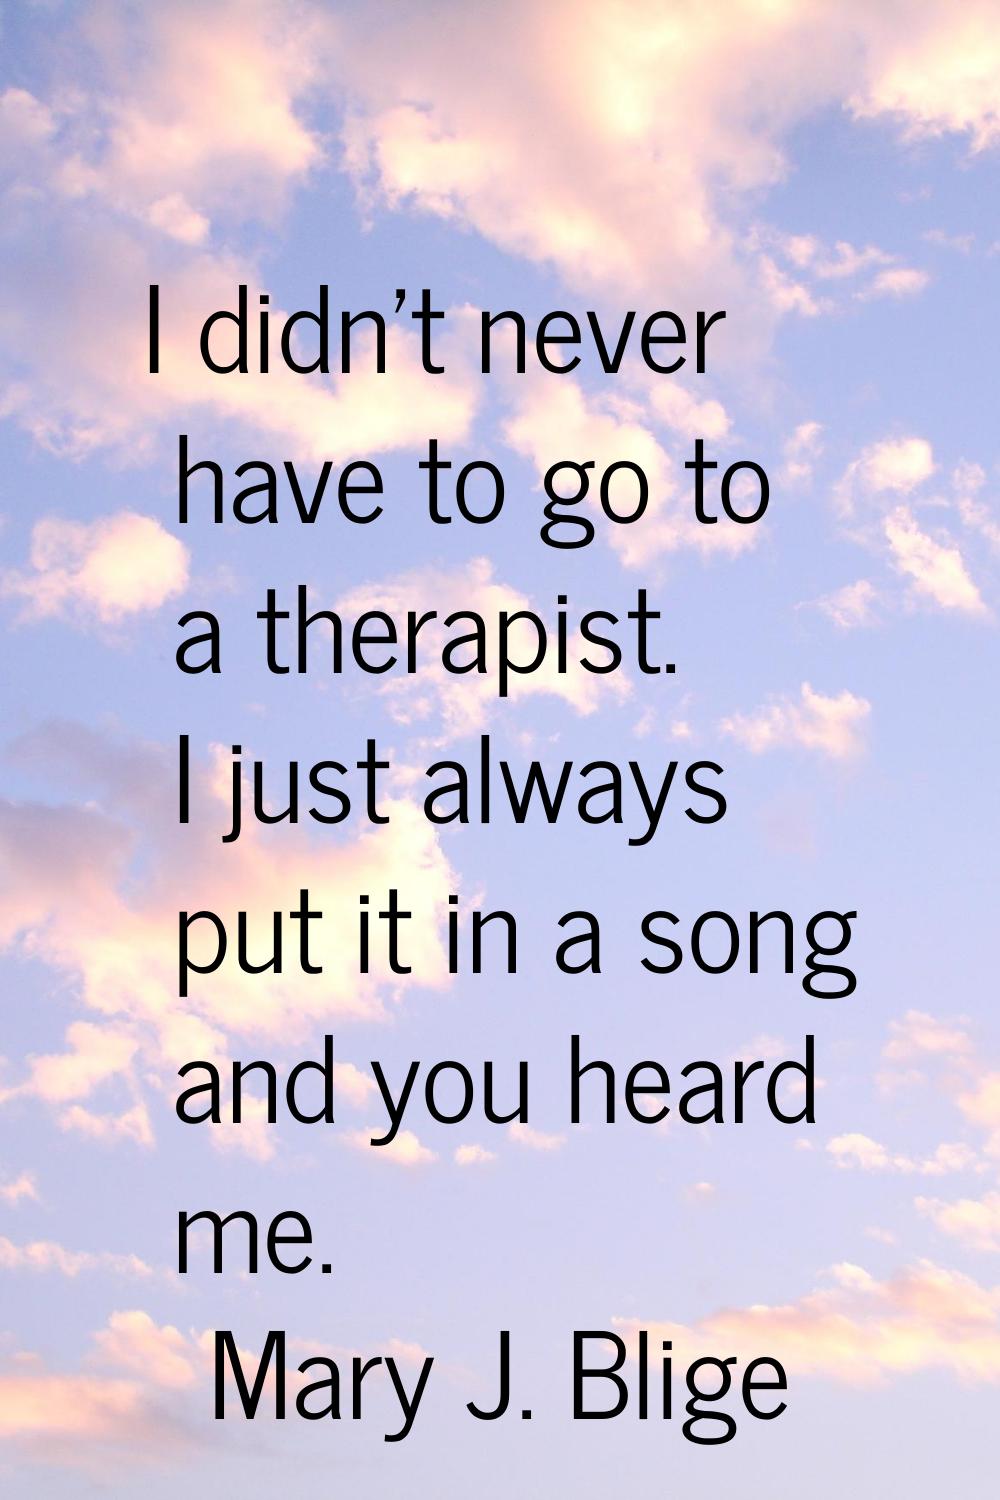 I didn't never have to go to a therapist. I just always put it in a song and you heard me.